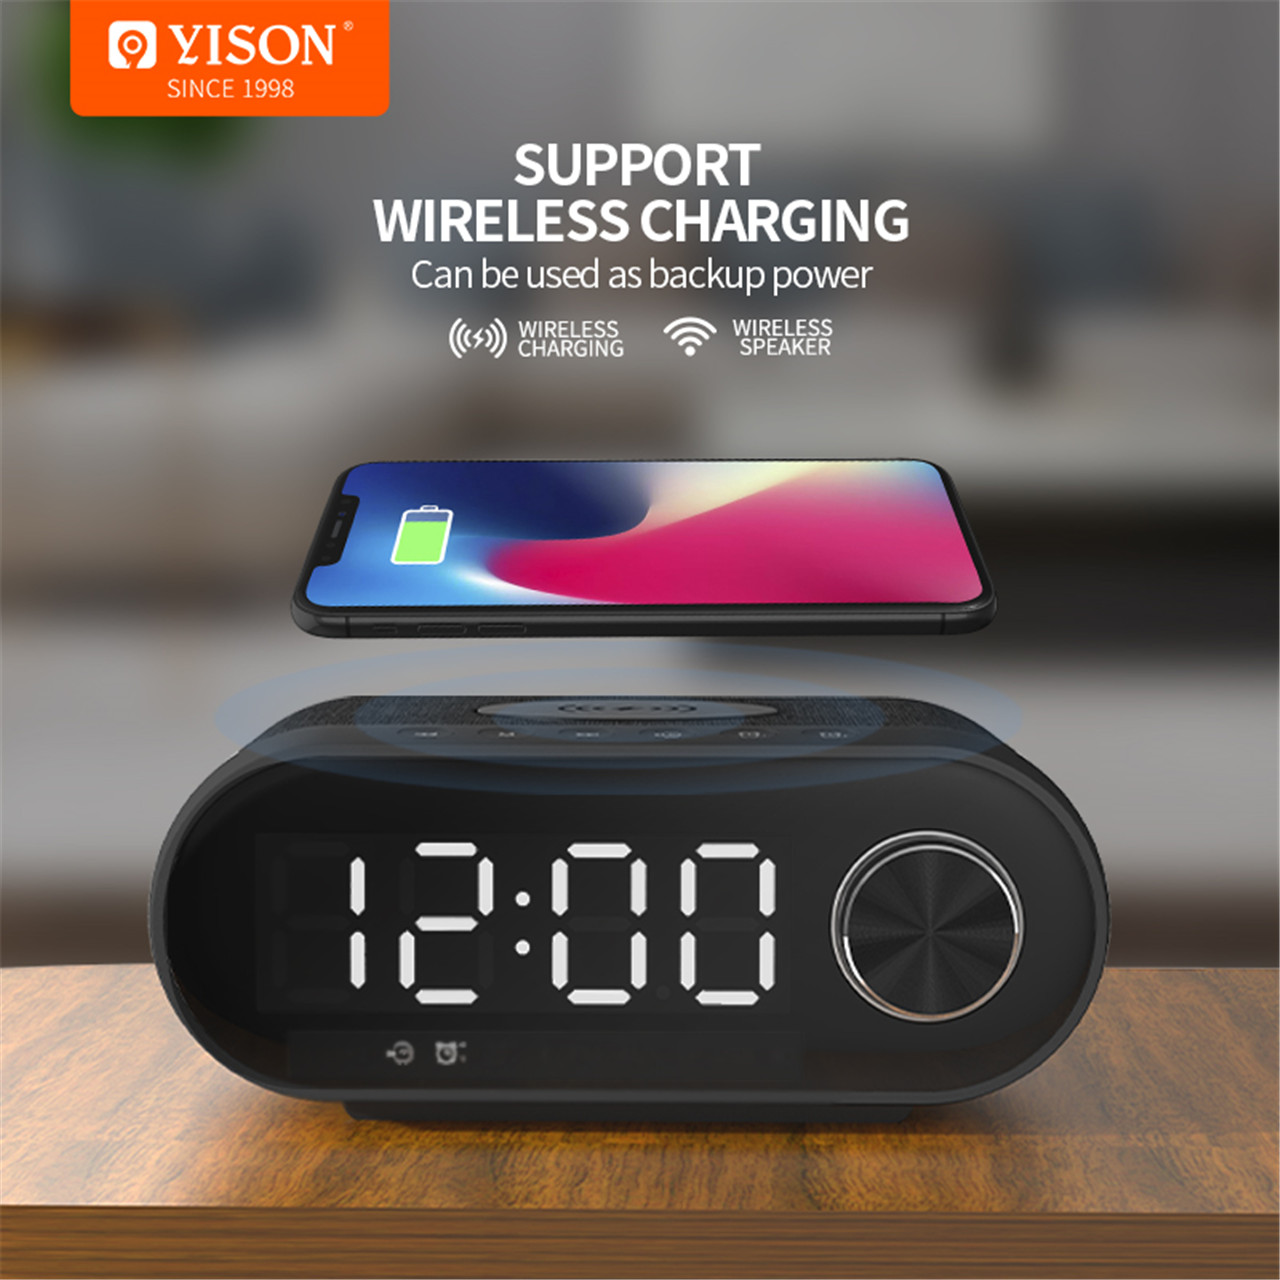 Wholesale Best Bluetooth Speaker Amplifier Supplier –  2022 WS-4 Digital LED Alarm Clock with Wireless Charger – YISON